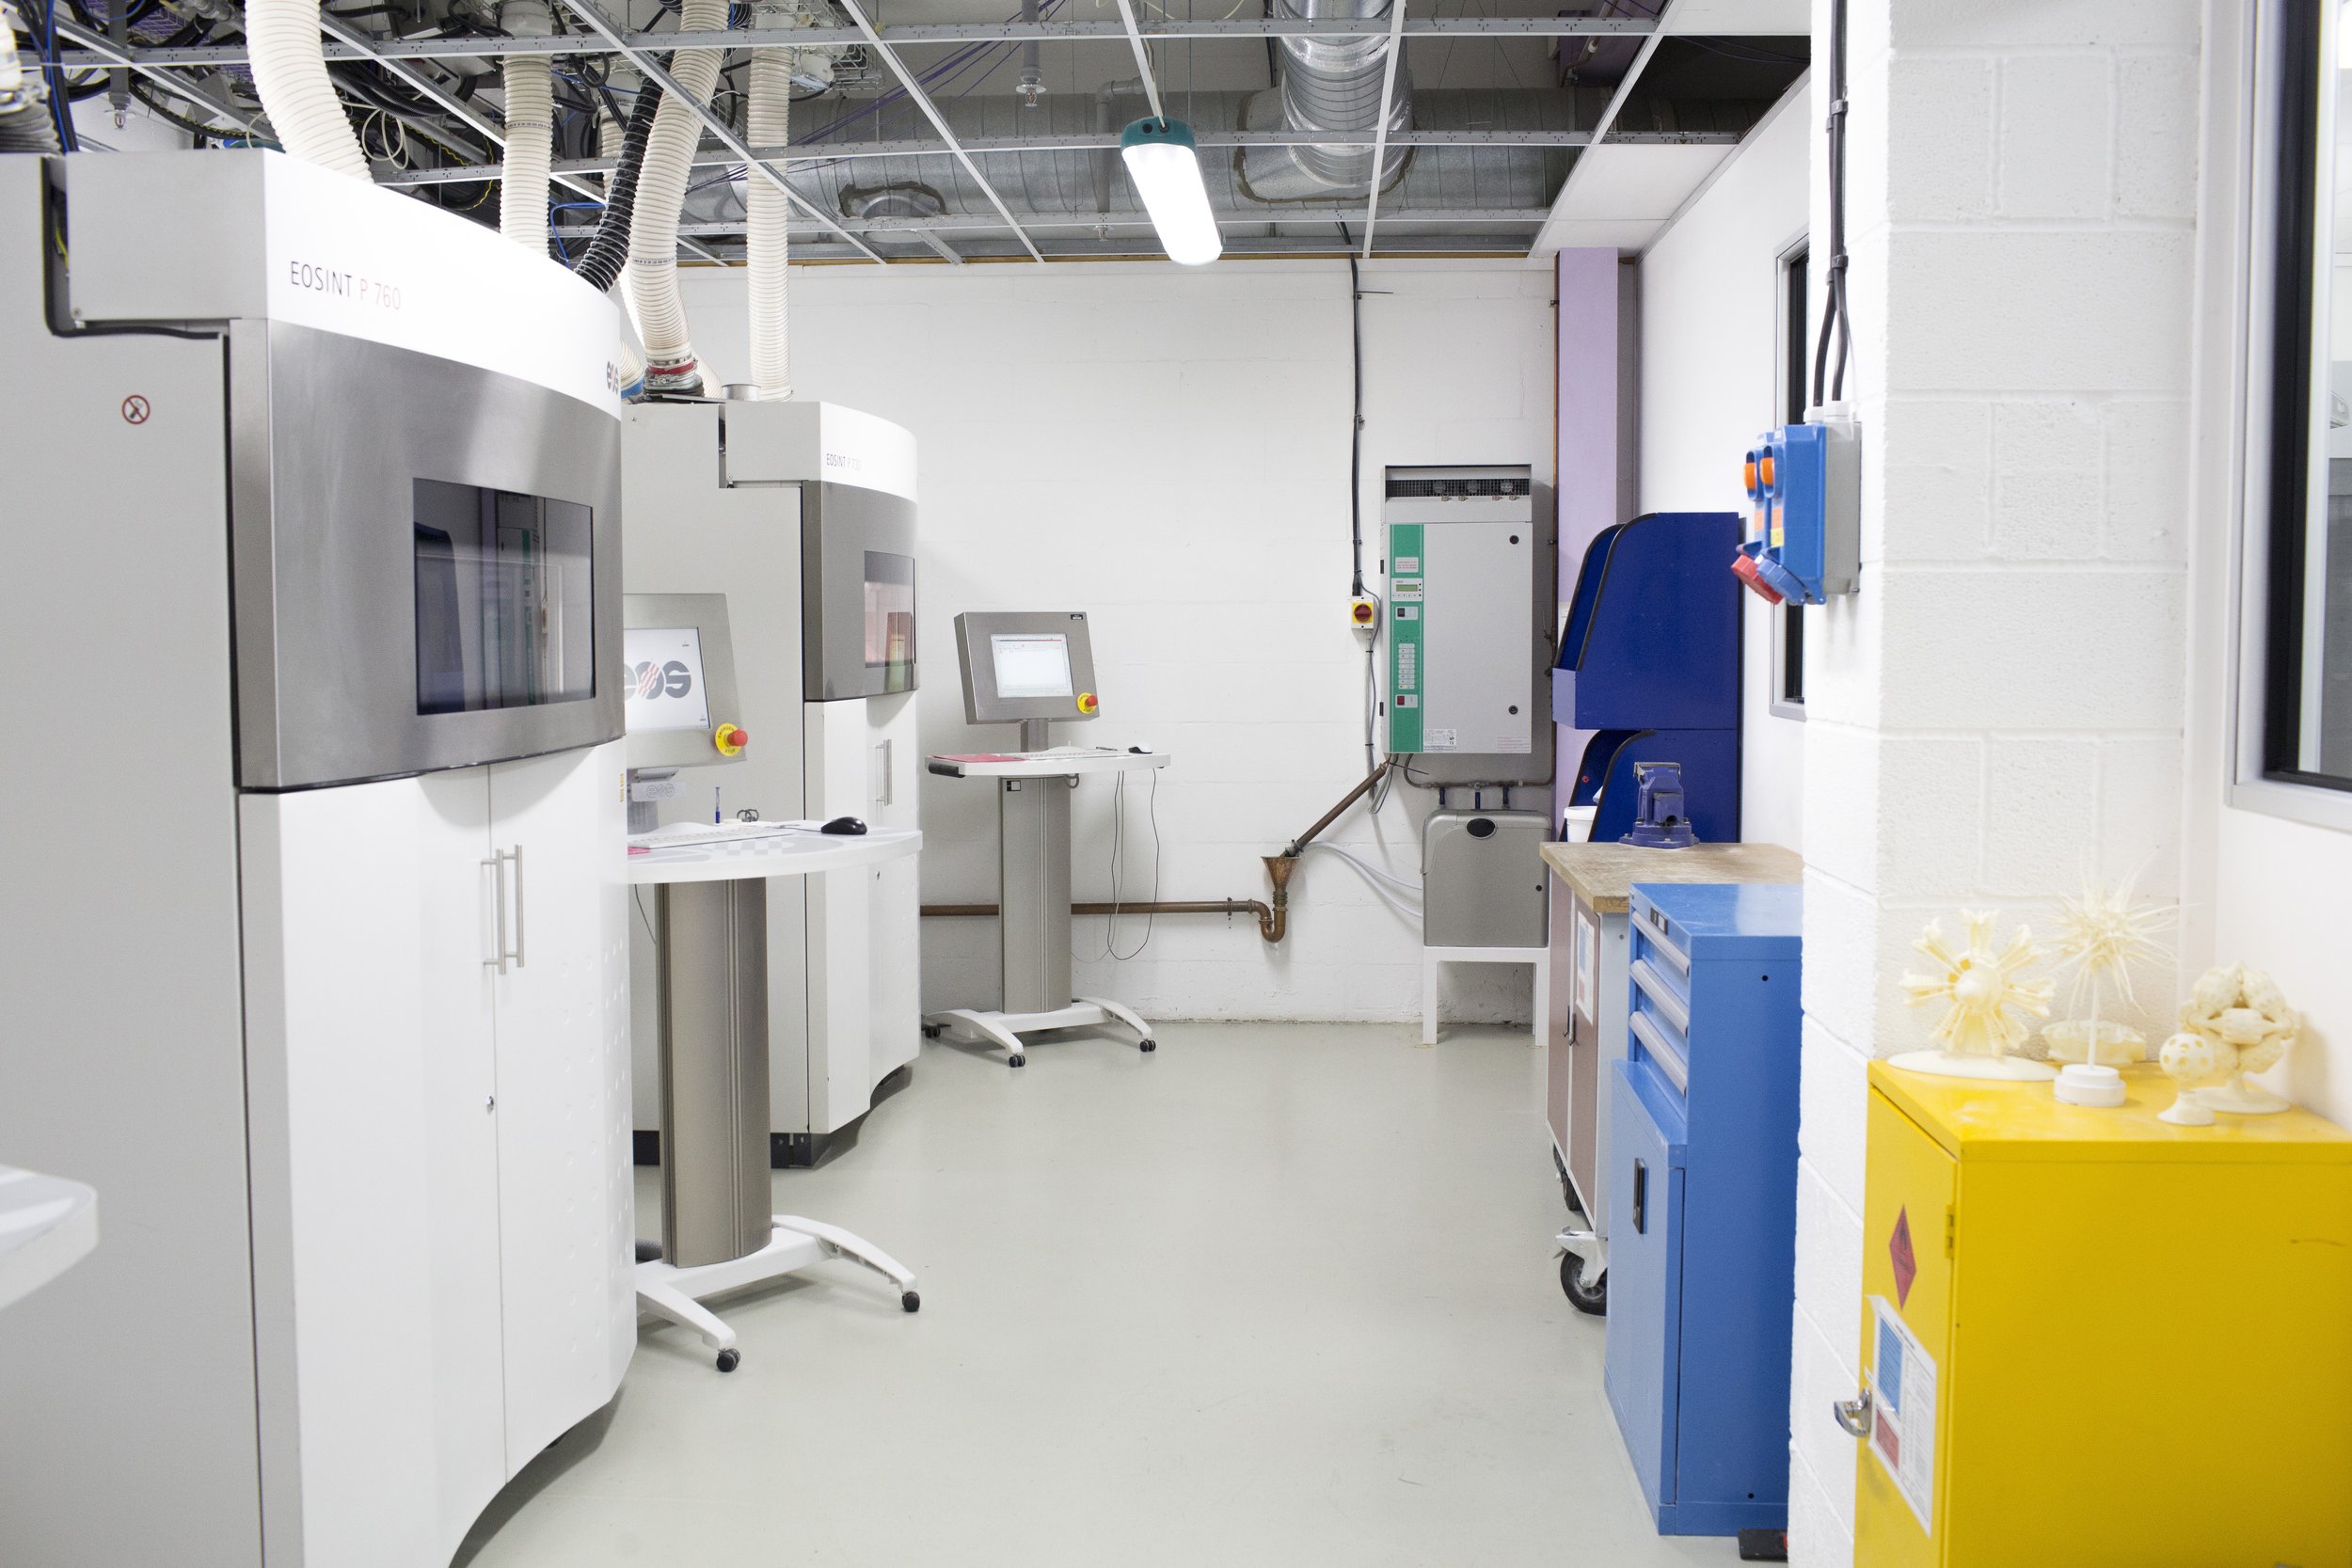   Inside the Dyson SLS lab, a prototyping lab for 3D printing.   